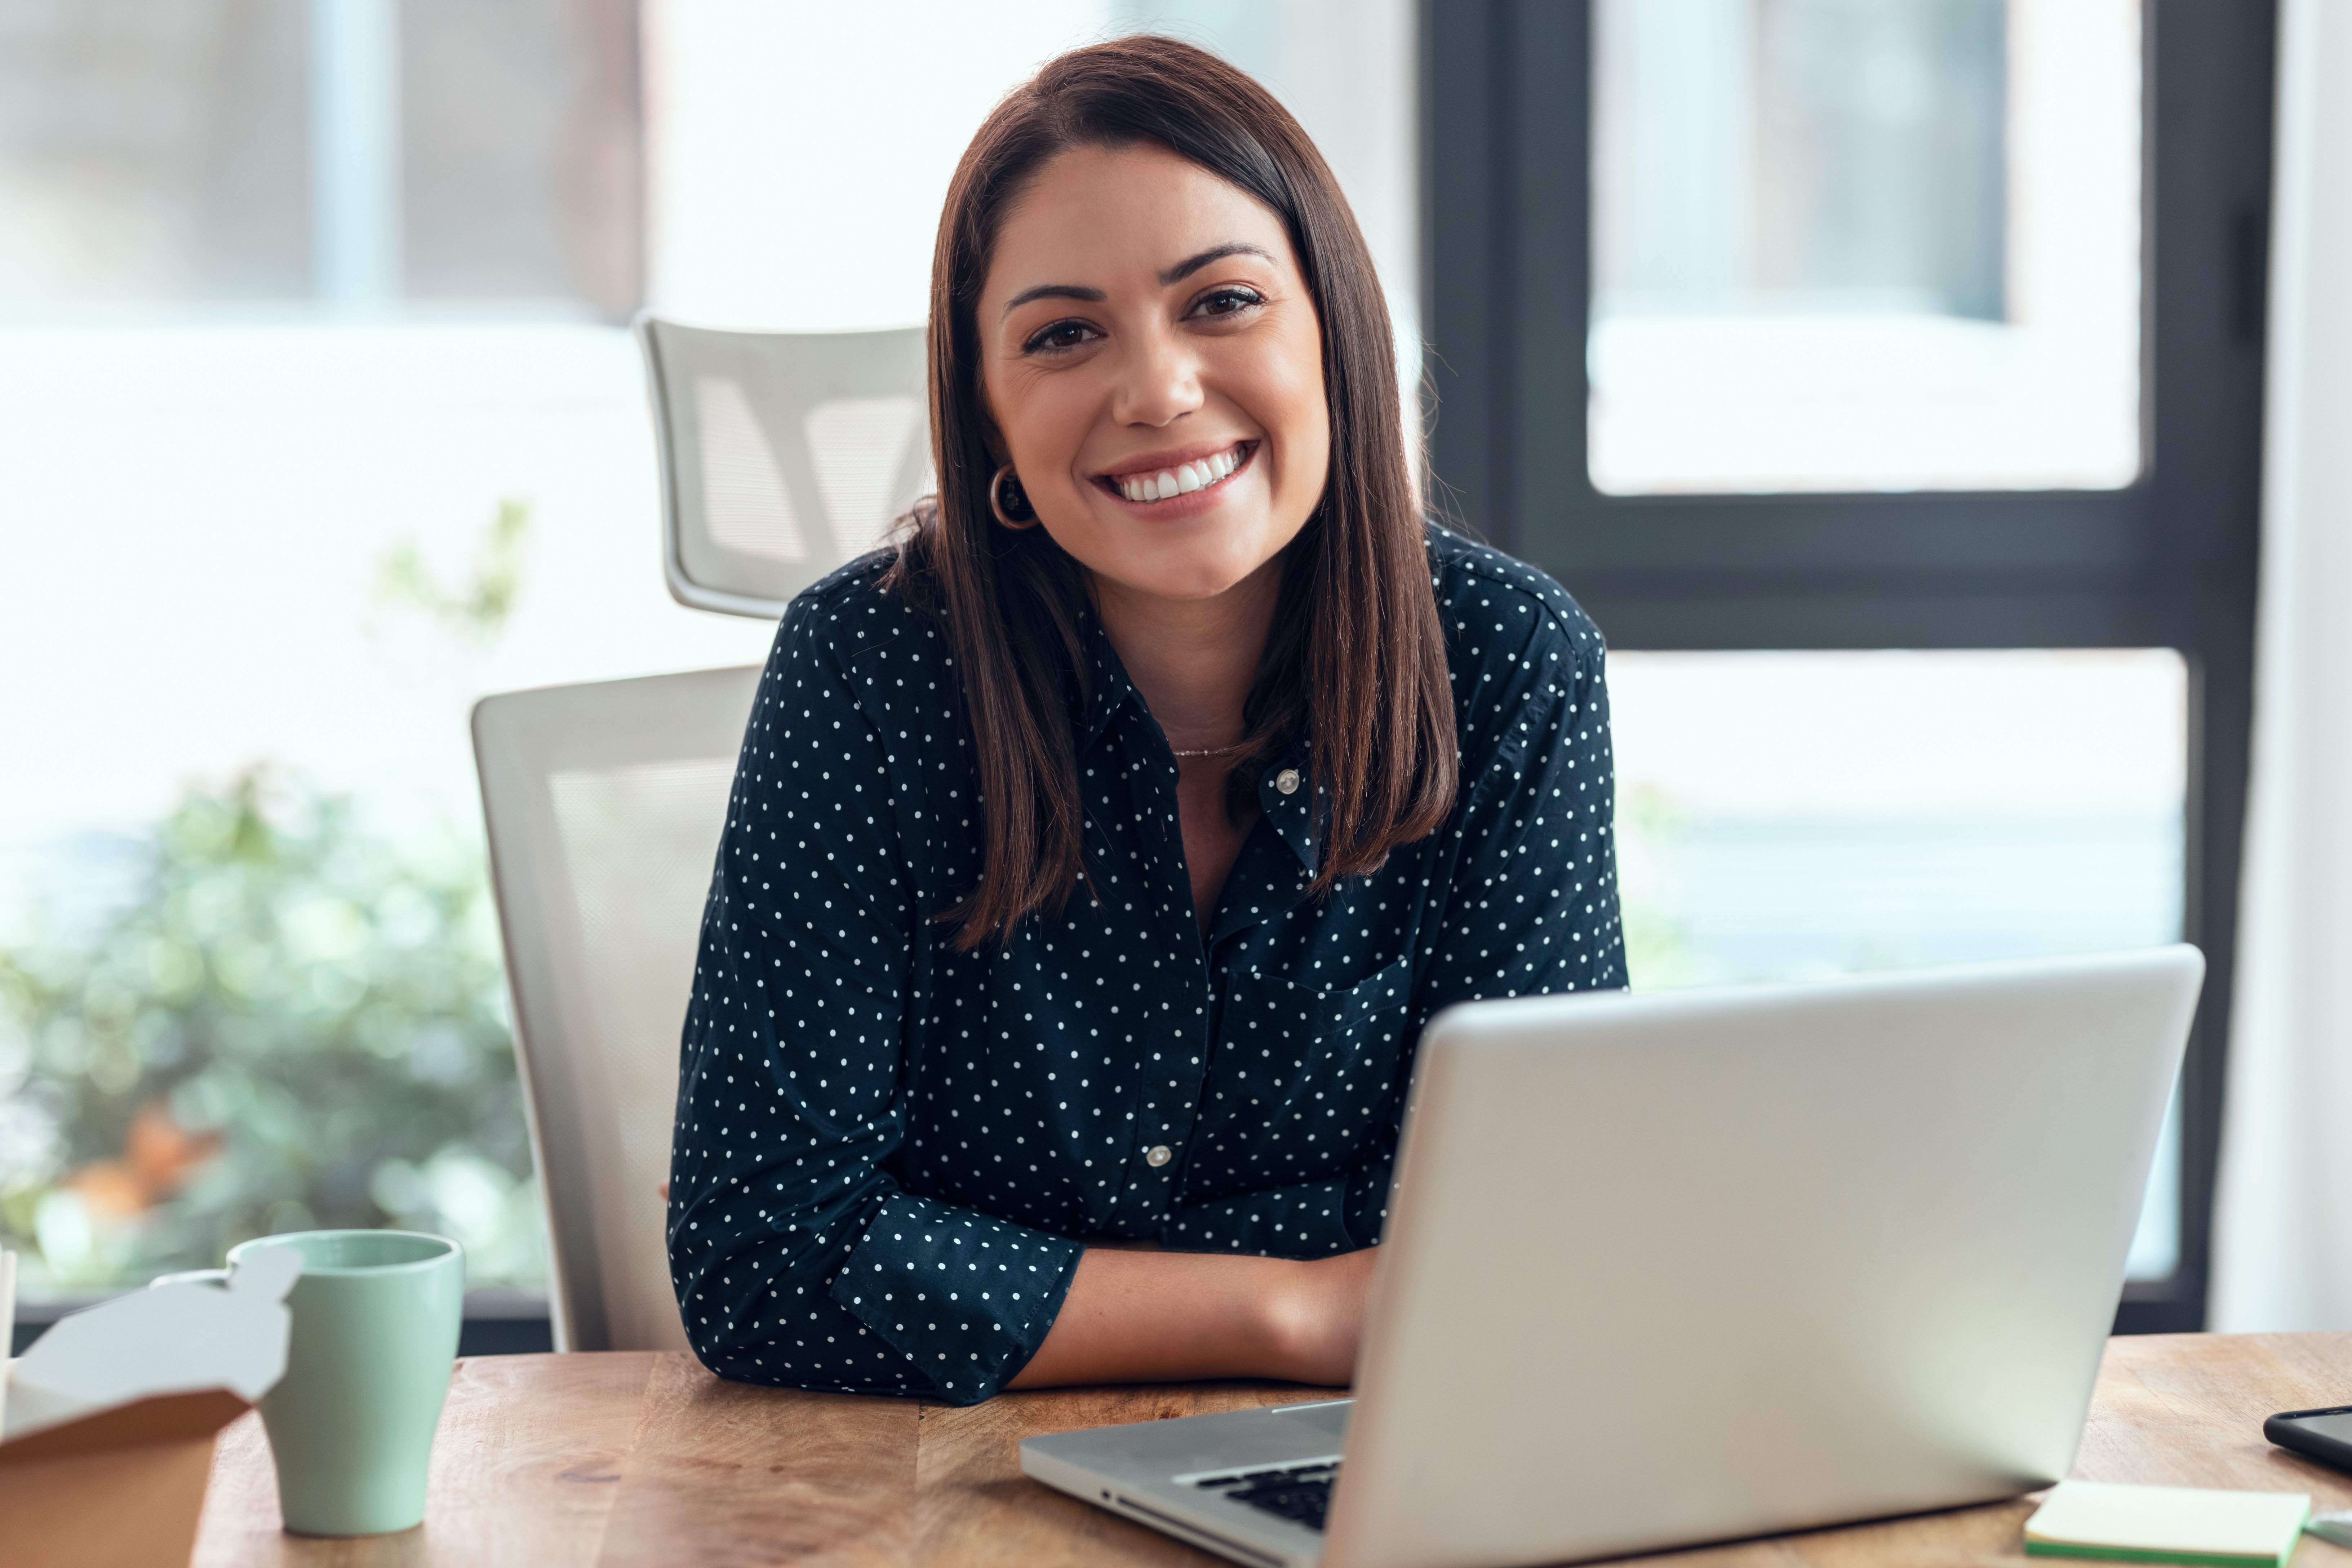 Smiling woman sitting in front of laptop